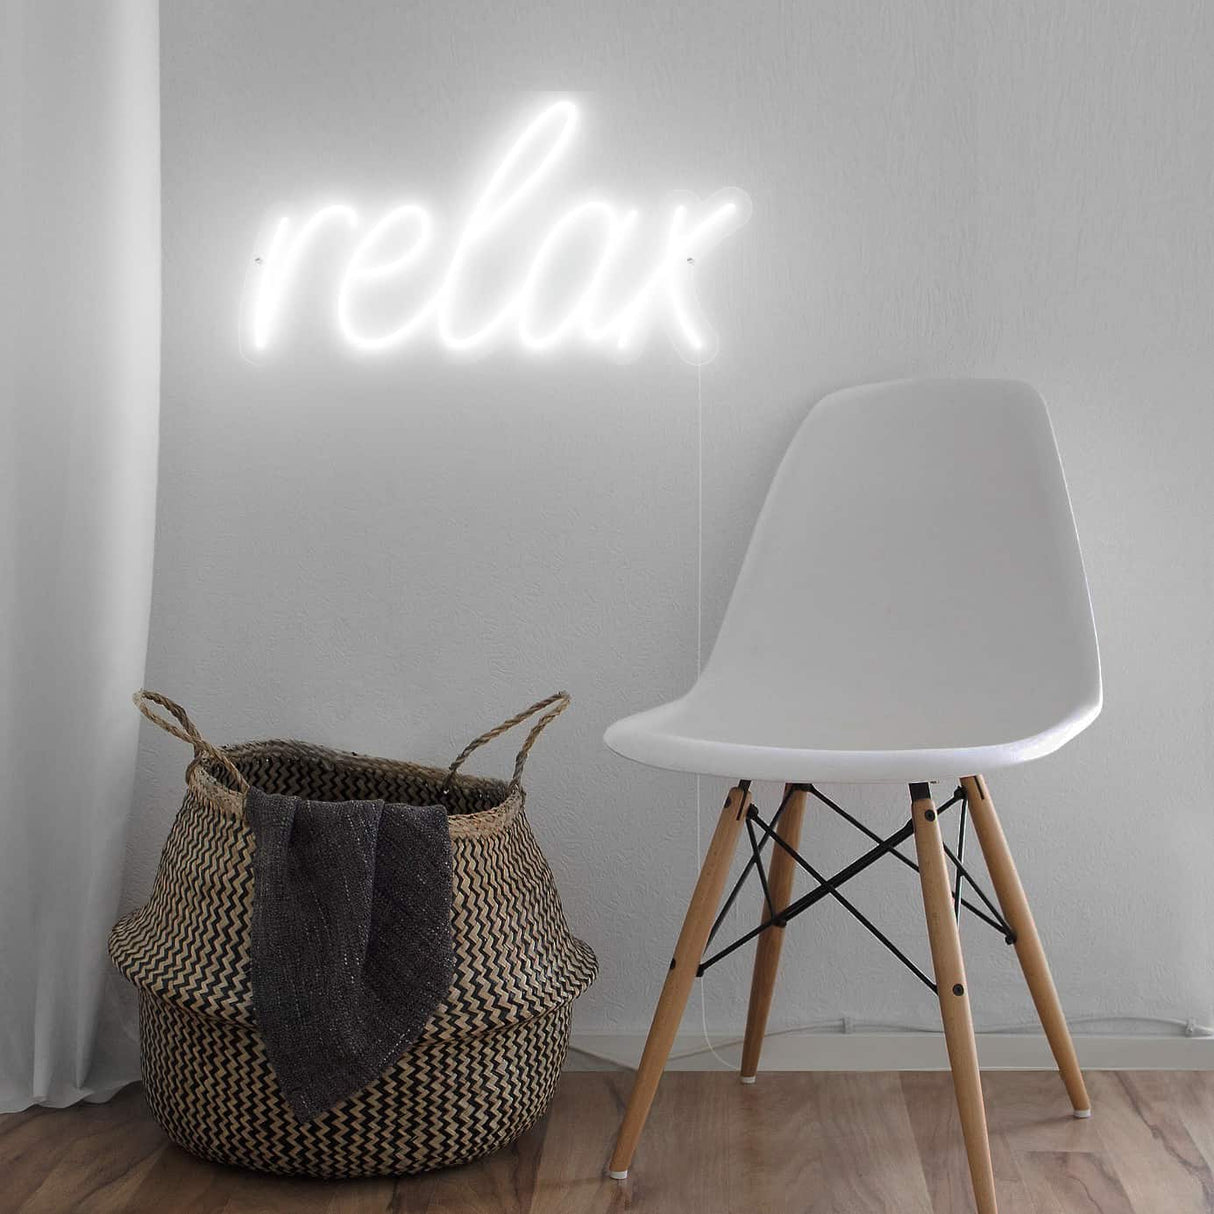 neon_led_relax